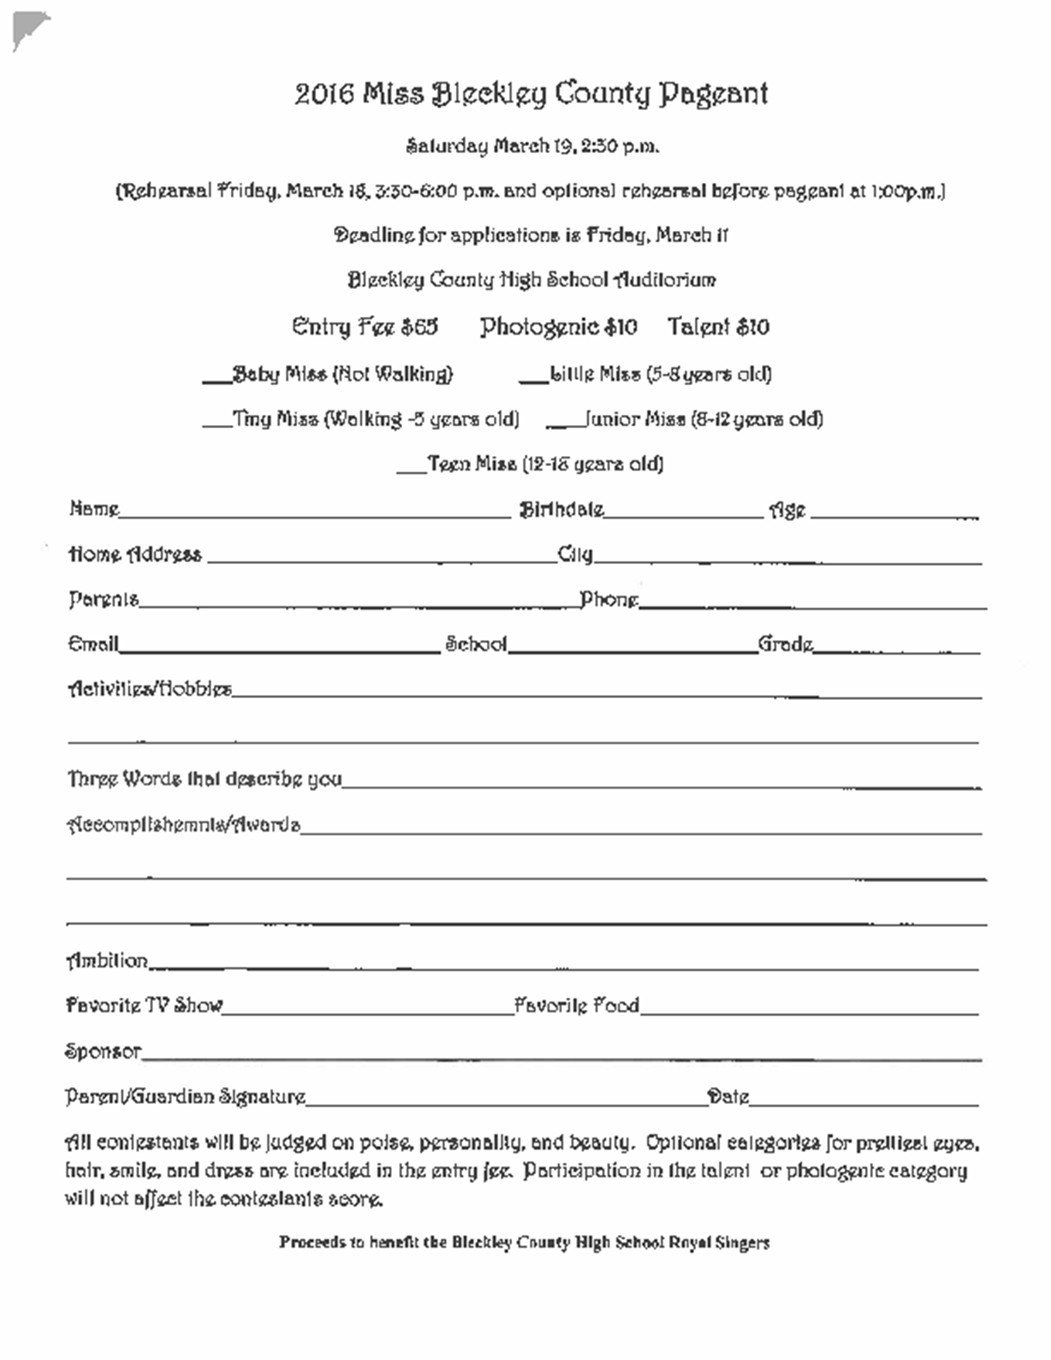 Pageant Entry form Template Miss Bleckley County Pageant March 19 events